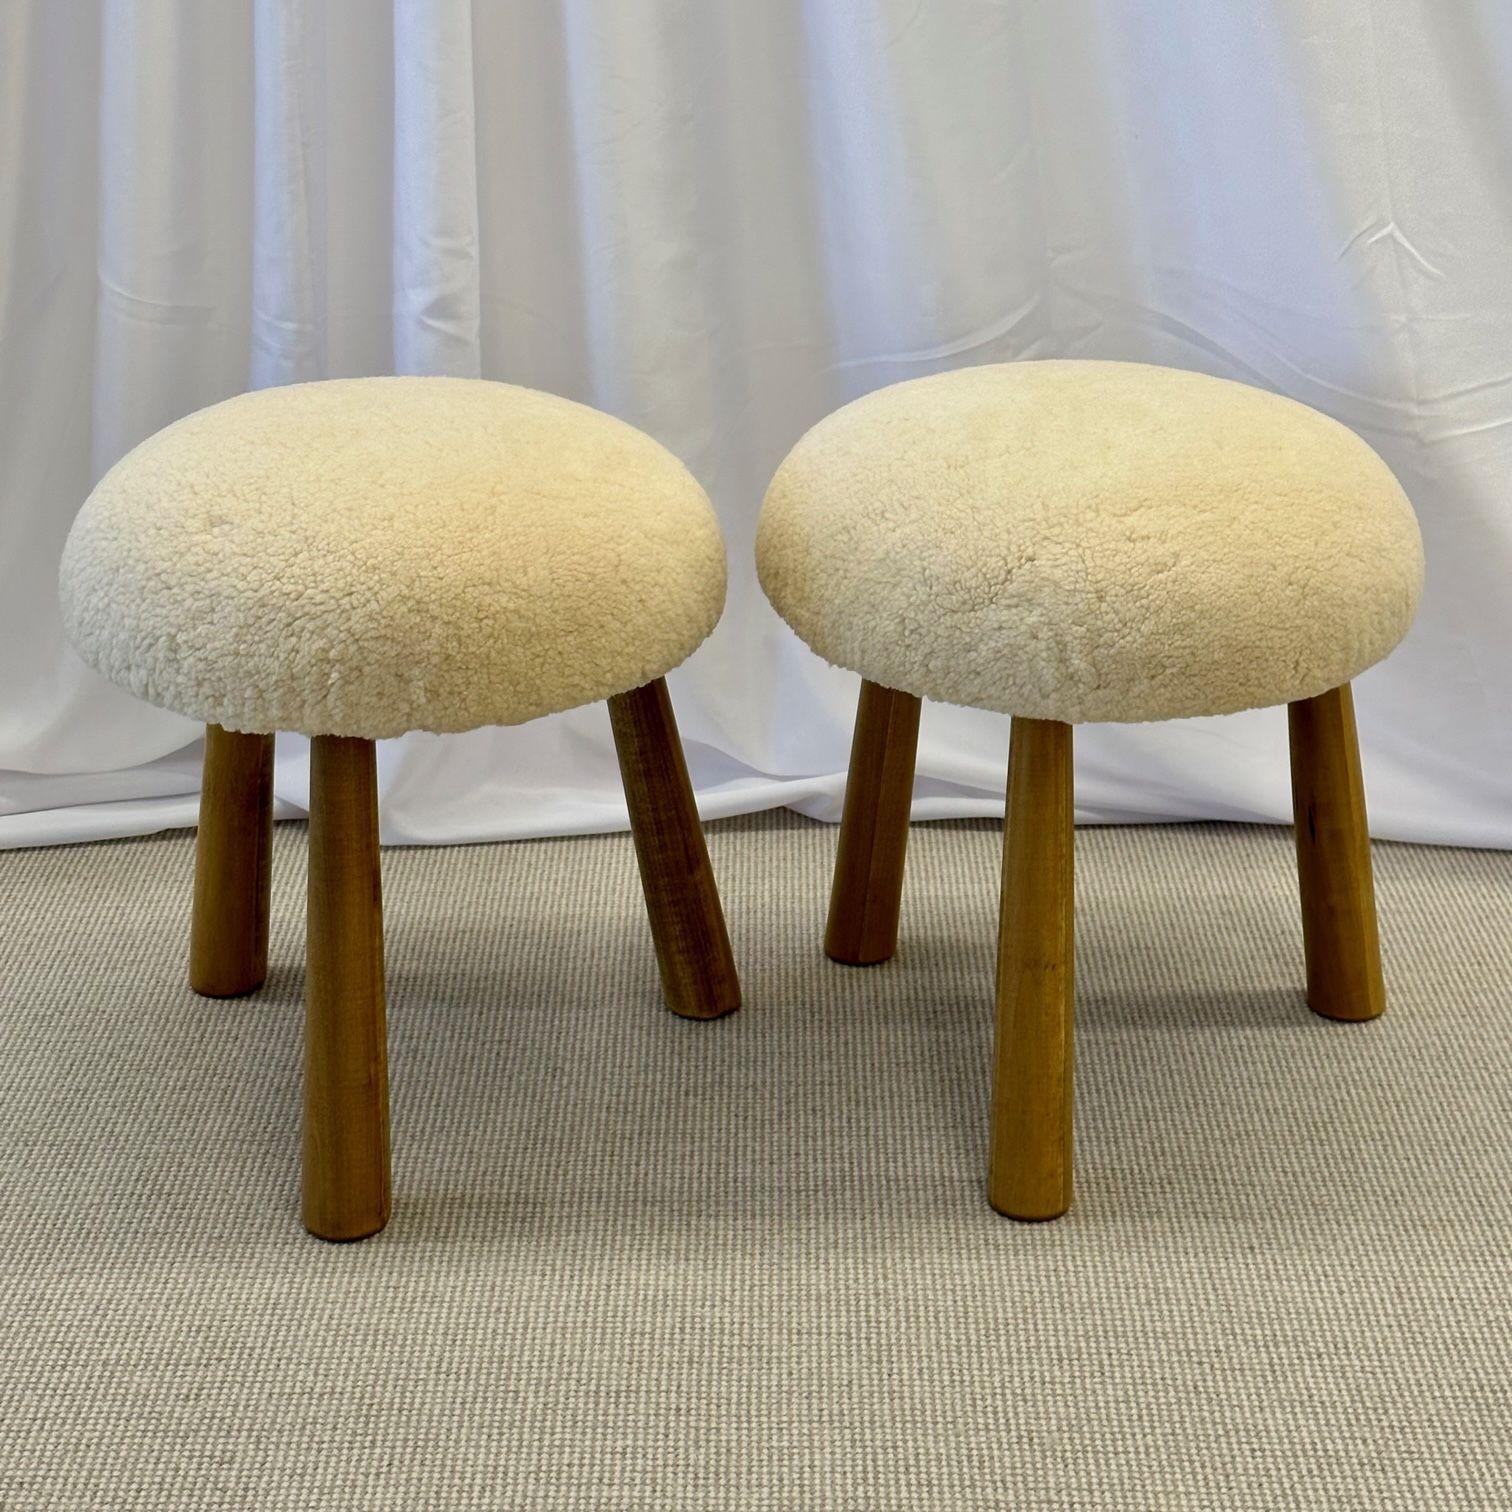 Pair of Contemporary Scandinavian Modern style sheepskin foot-stools / ottomans
Contemporary organic form tri-pod stools or ottomans. New memory foam cushioning and genuine shearling. Can mix and match beige or honey sheepskin color stools. The